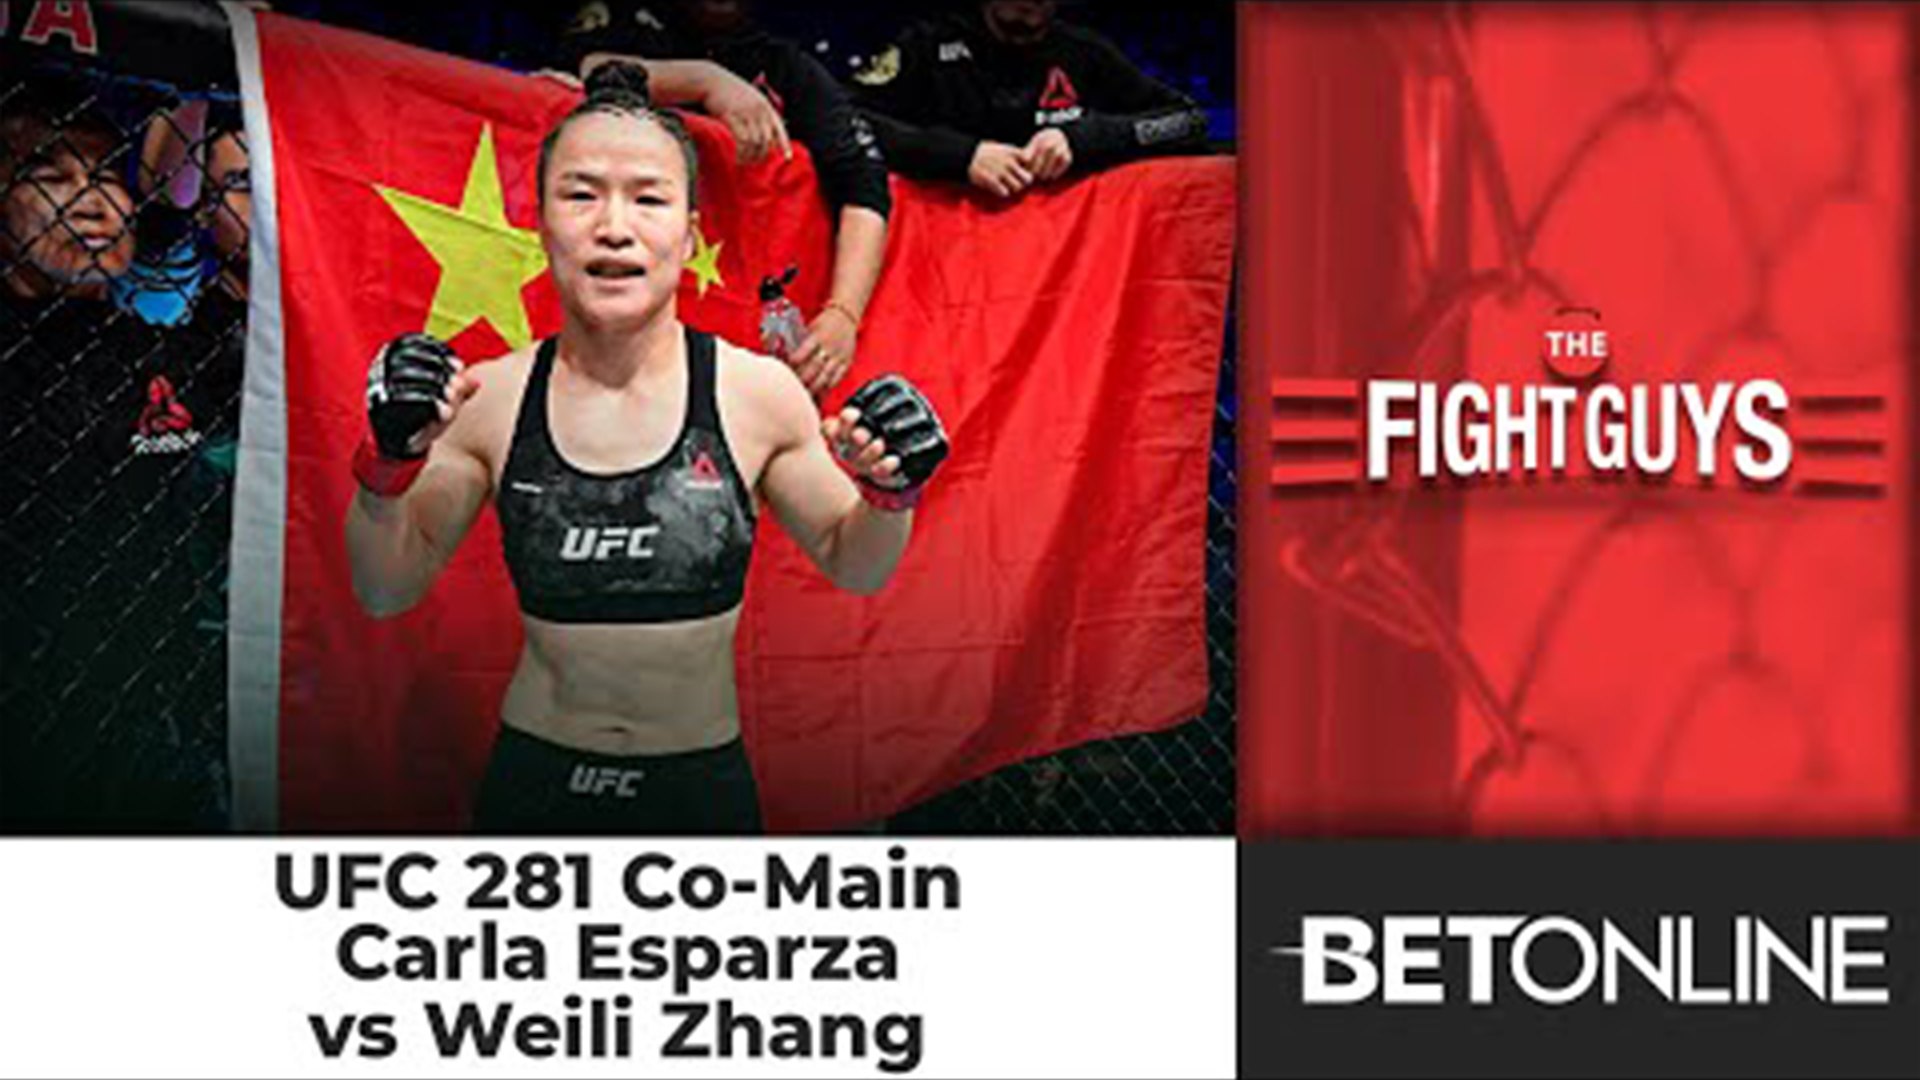 Carla Esparza vs Weili Zhang Full Fight Predictions UFC 281 The Fight Guys